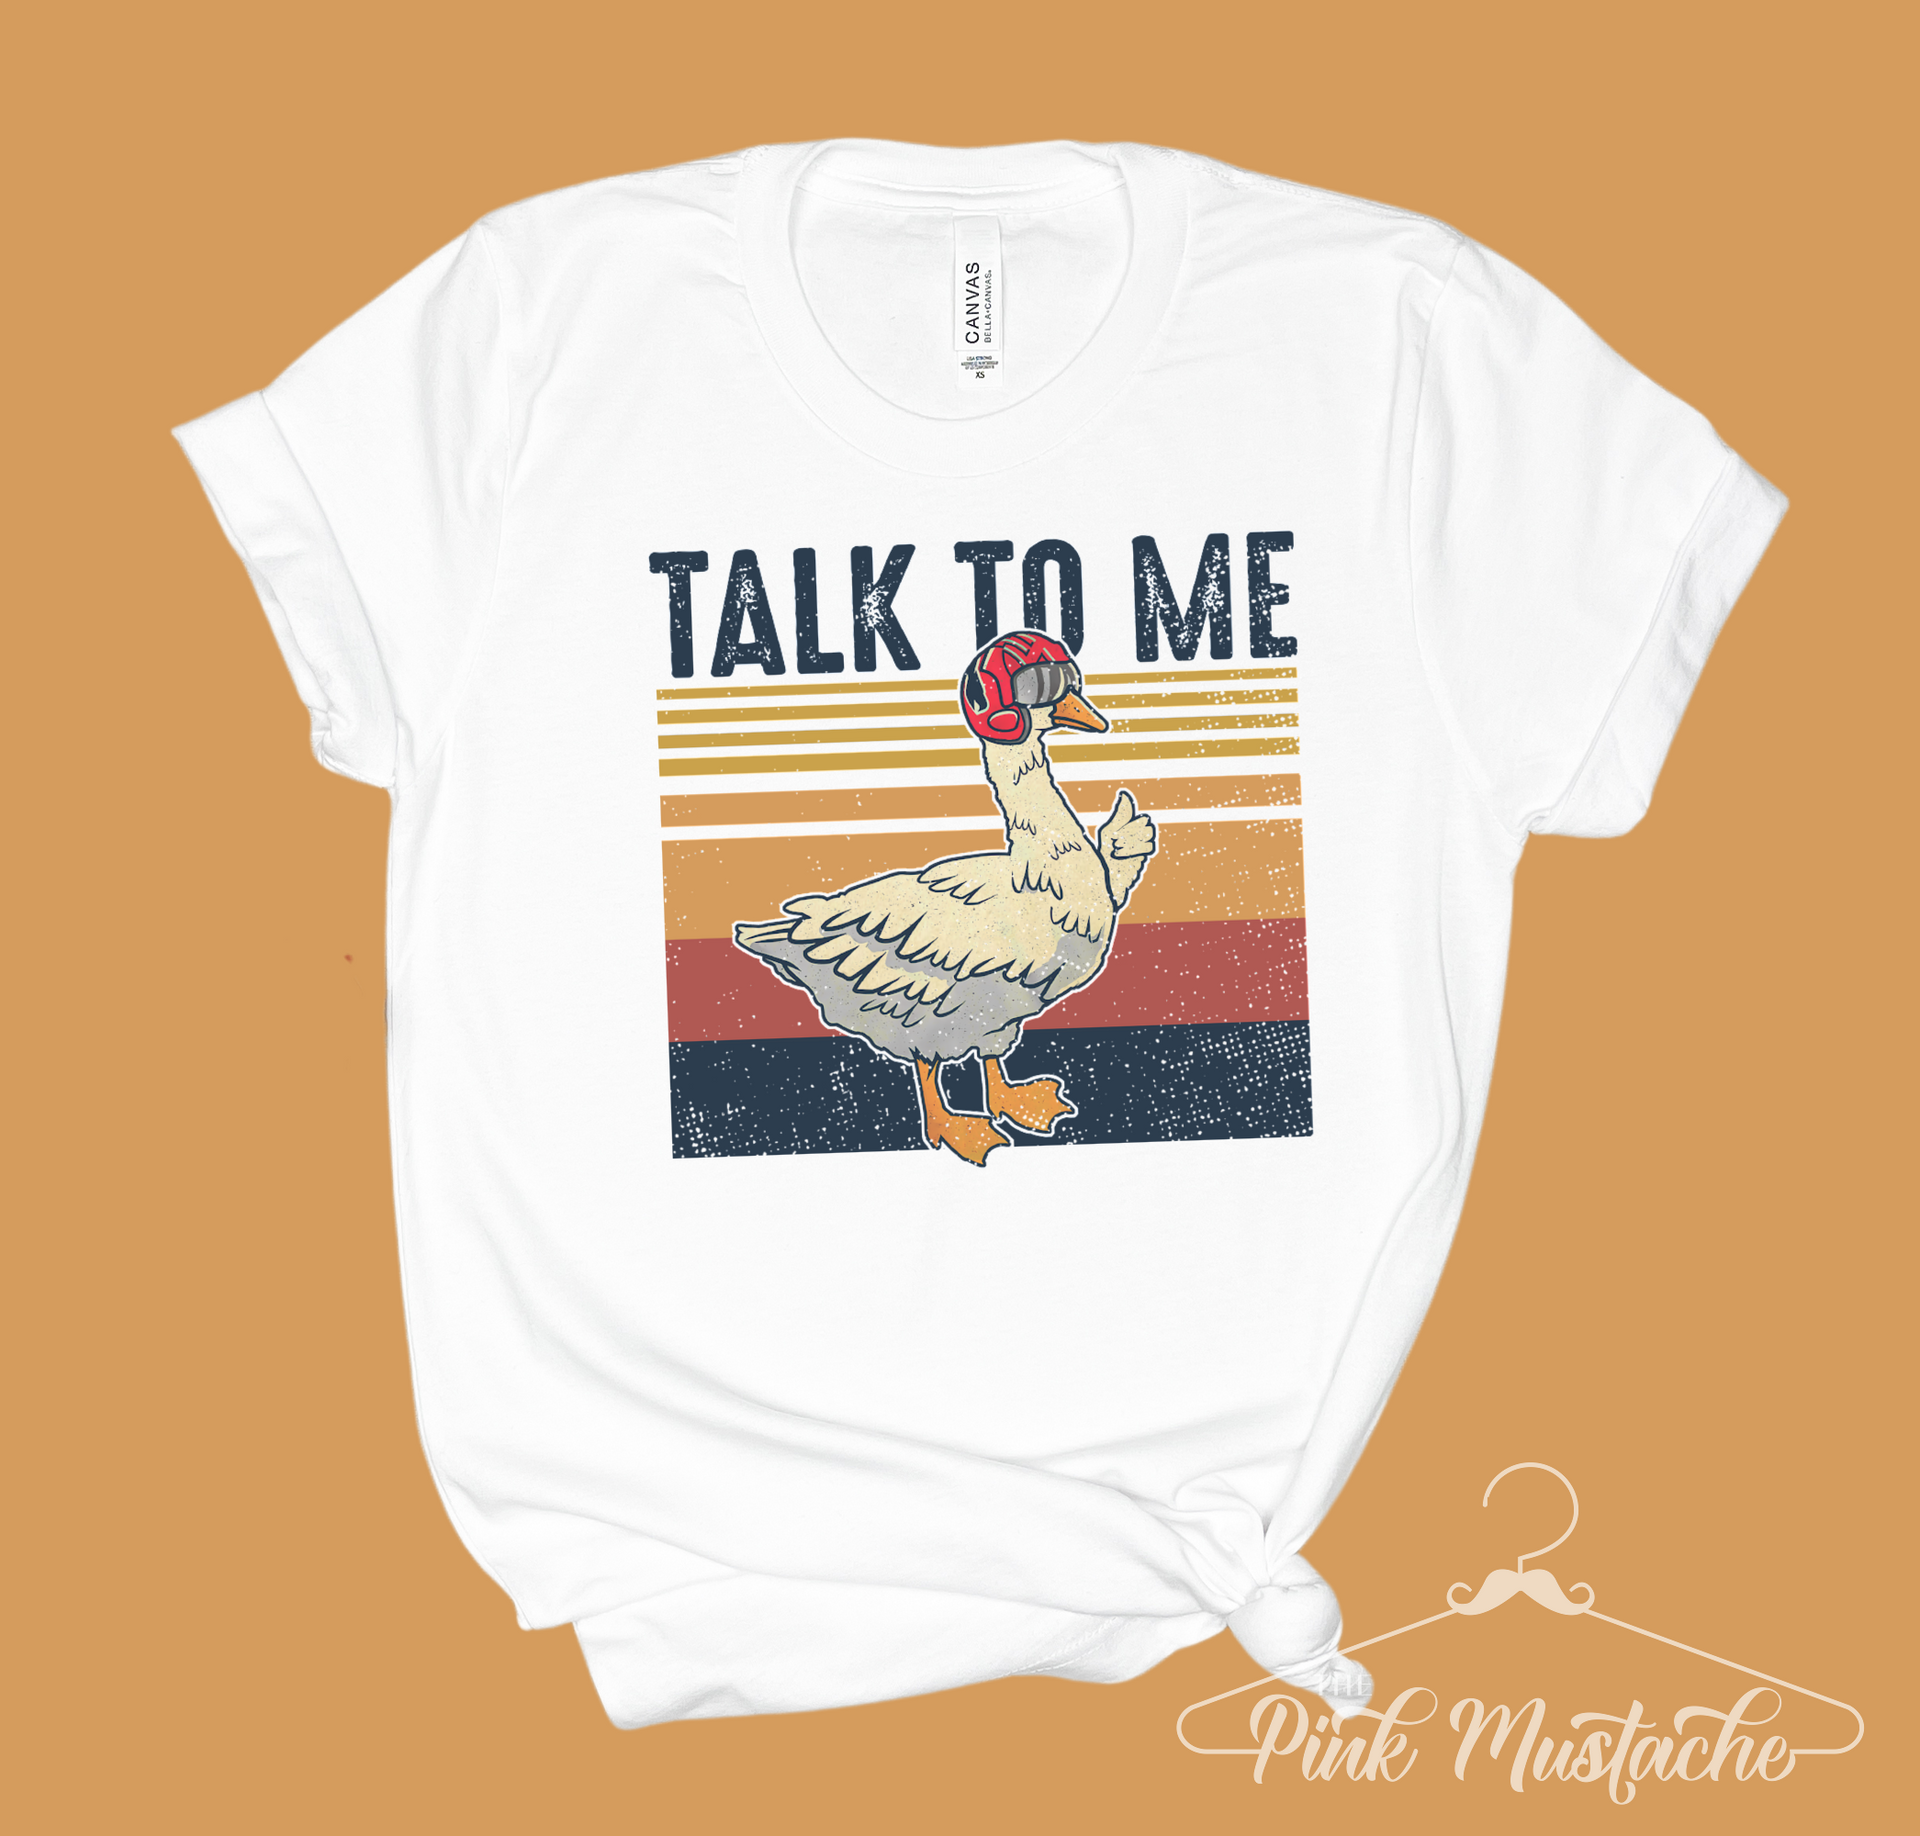 The Pink Mustache Talk to Me Goose T-Shirt Aviators - Bright Colors / Top Gun Inspired Tee / Maverick Goose / Aviators Tee - Top Gun 2 Inspired XS / Black